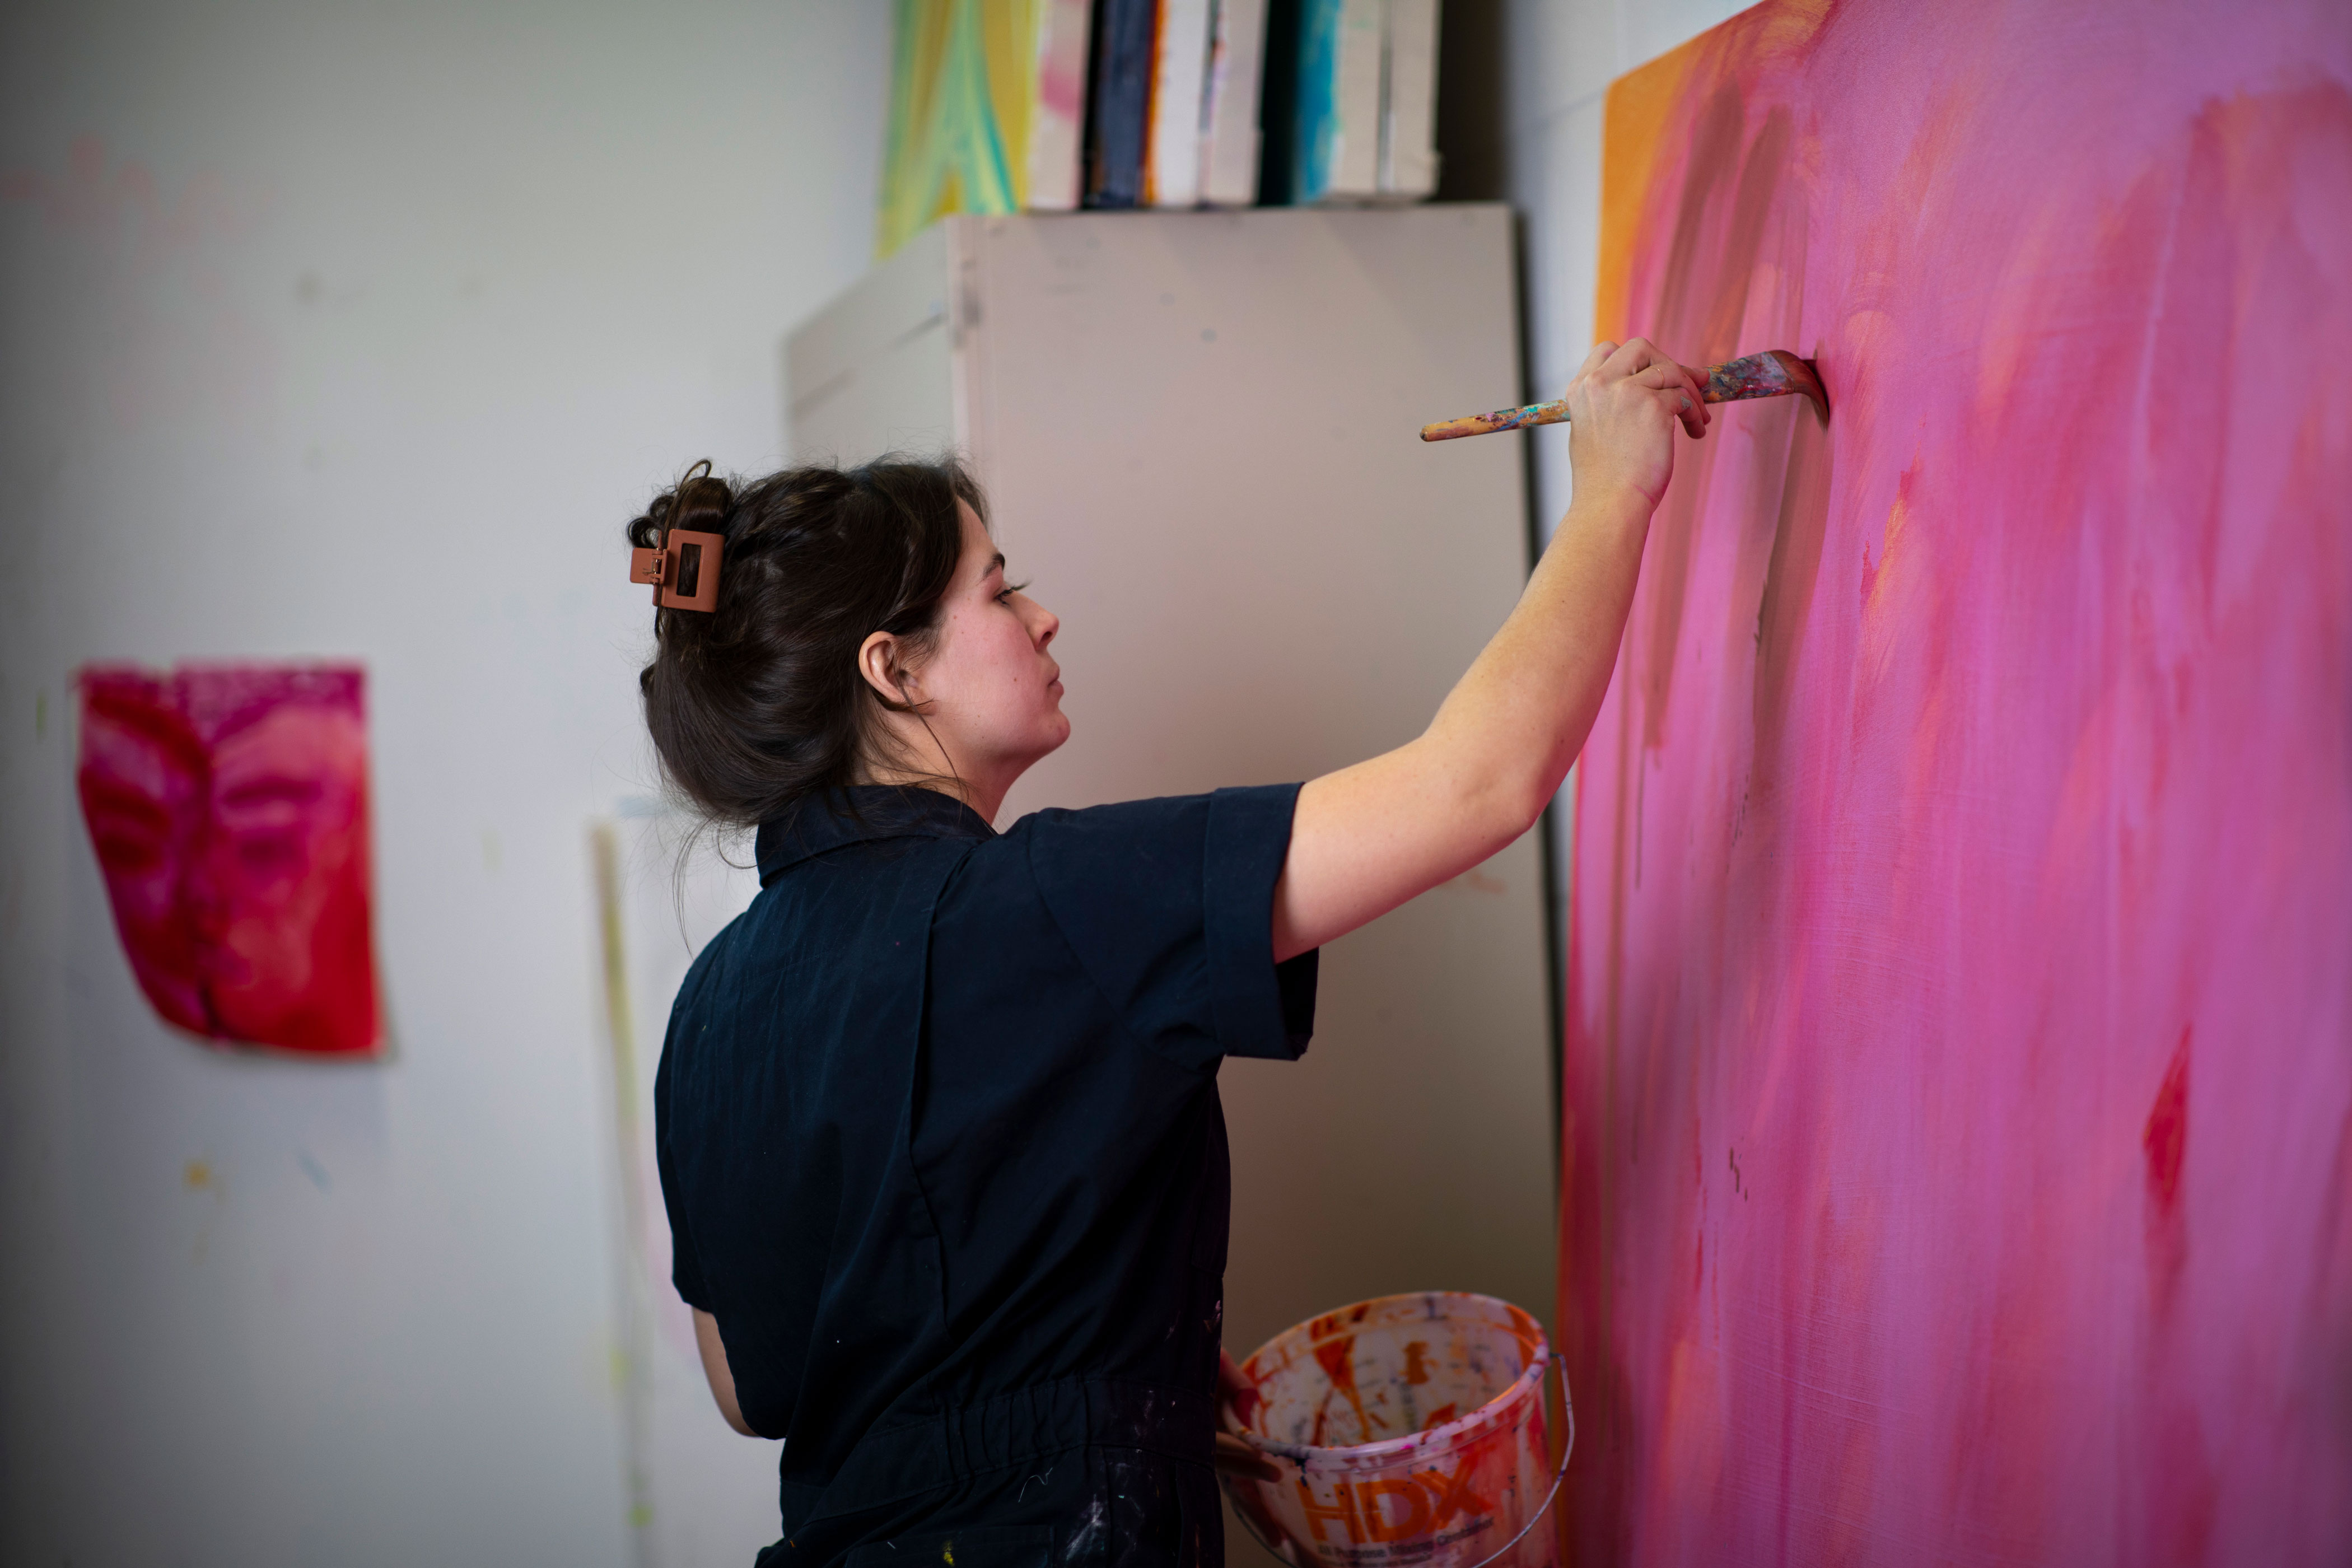 A student in navy coveralls, with her hair clipped back, uses a brush on a pink abstract painting.